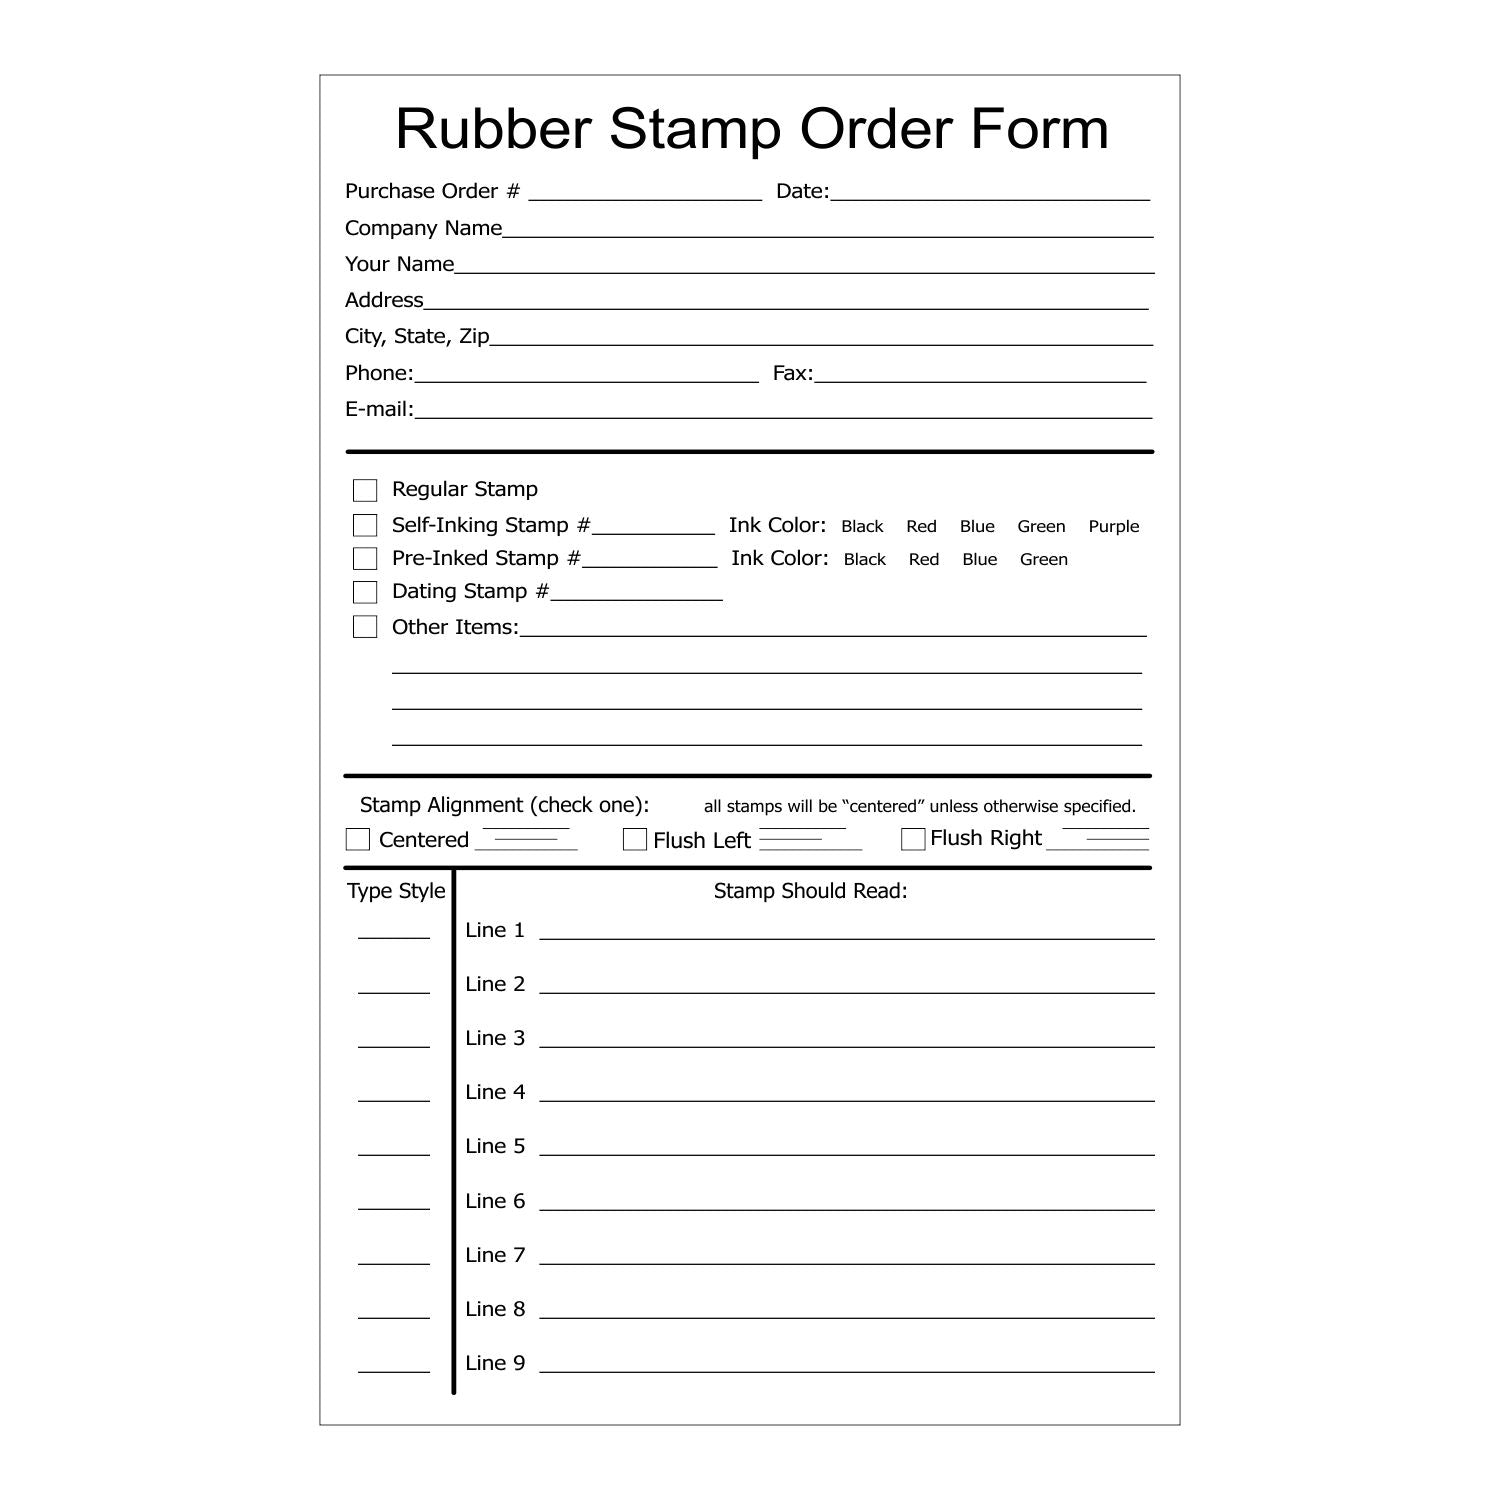 Order Forms - Rubber Stamp Materials